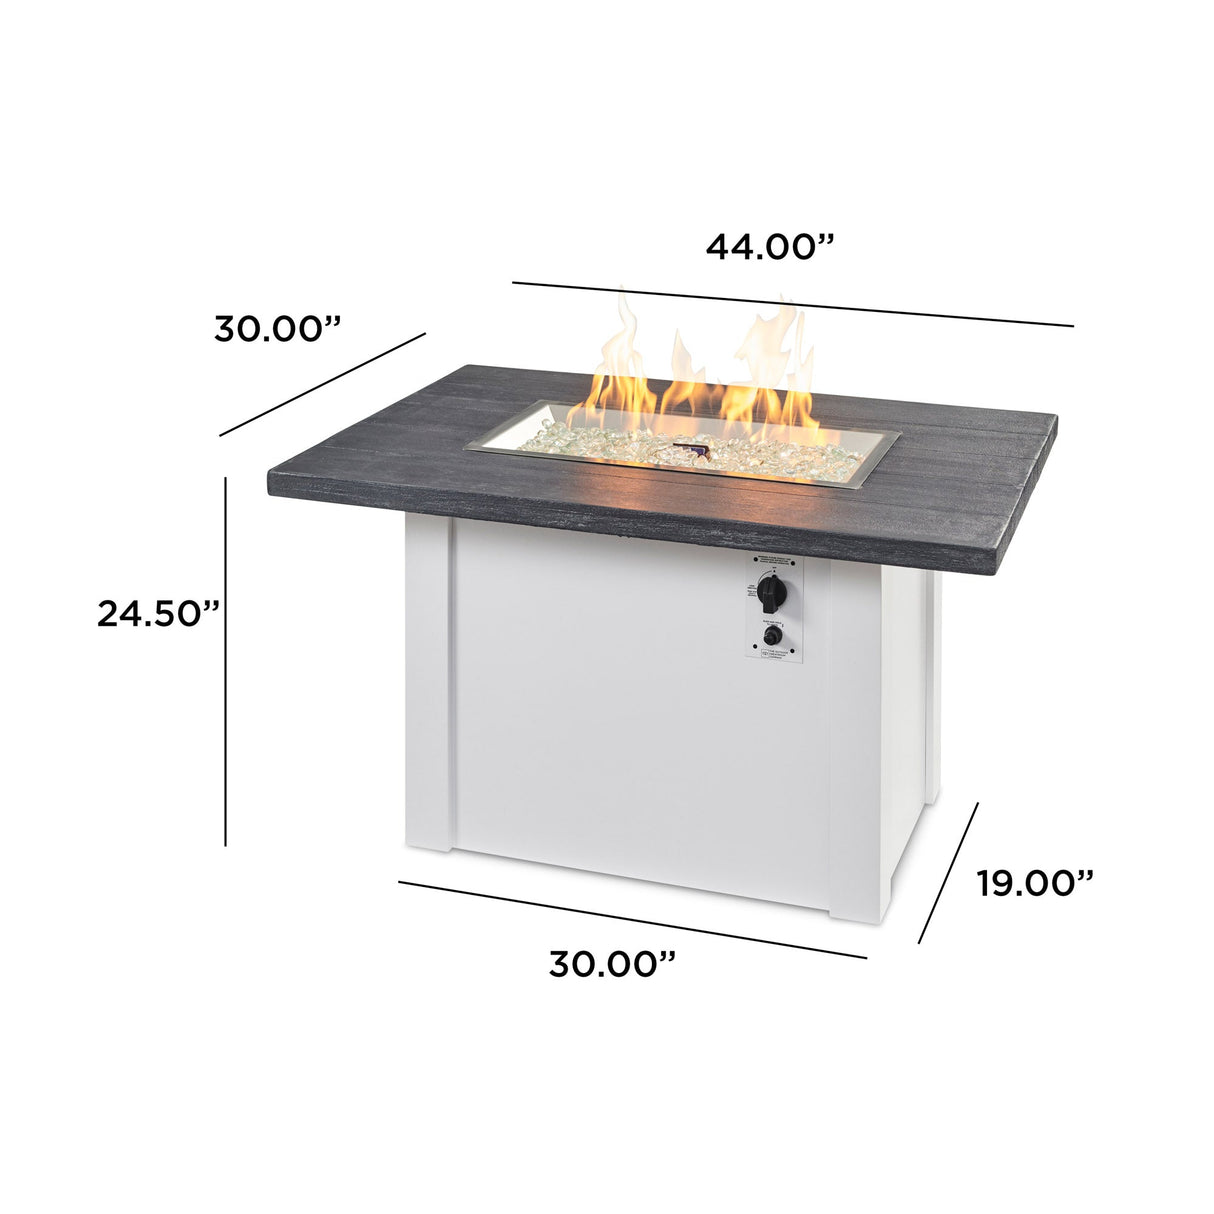 Dimensions overlaid on a Havenwood Rectangular Gas Fire Pit Table with a Carbon Grey top and White base